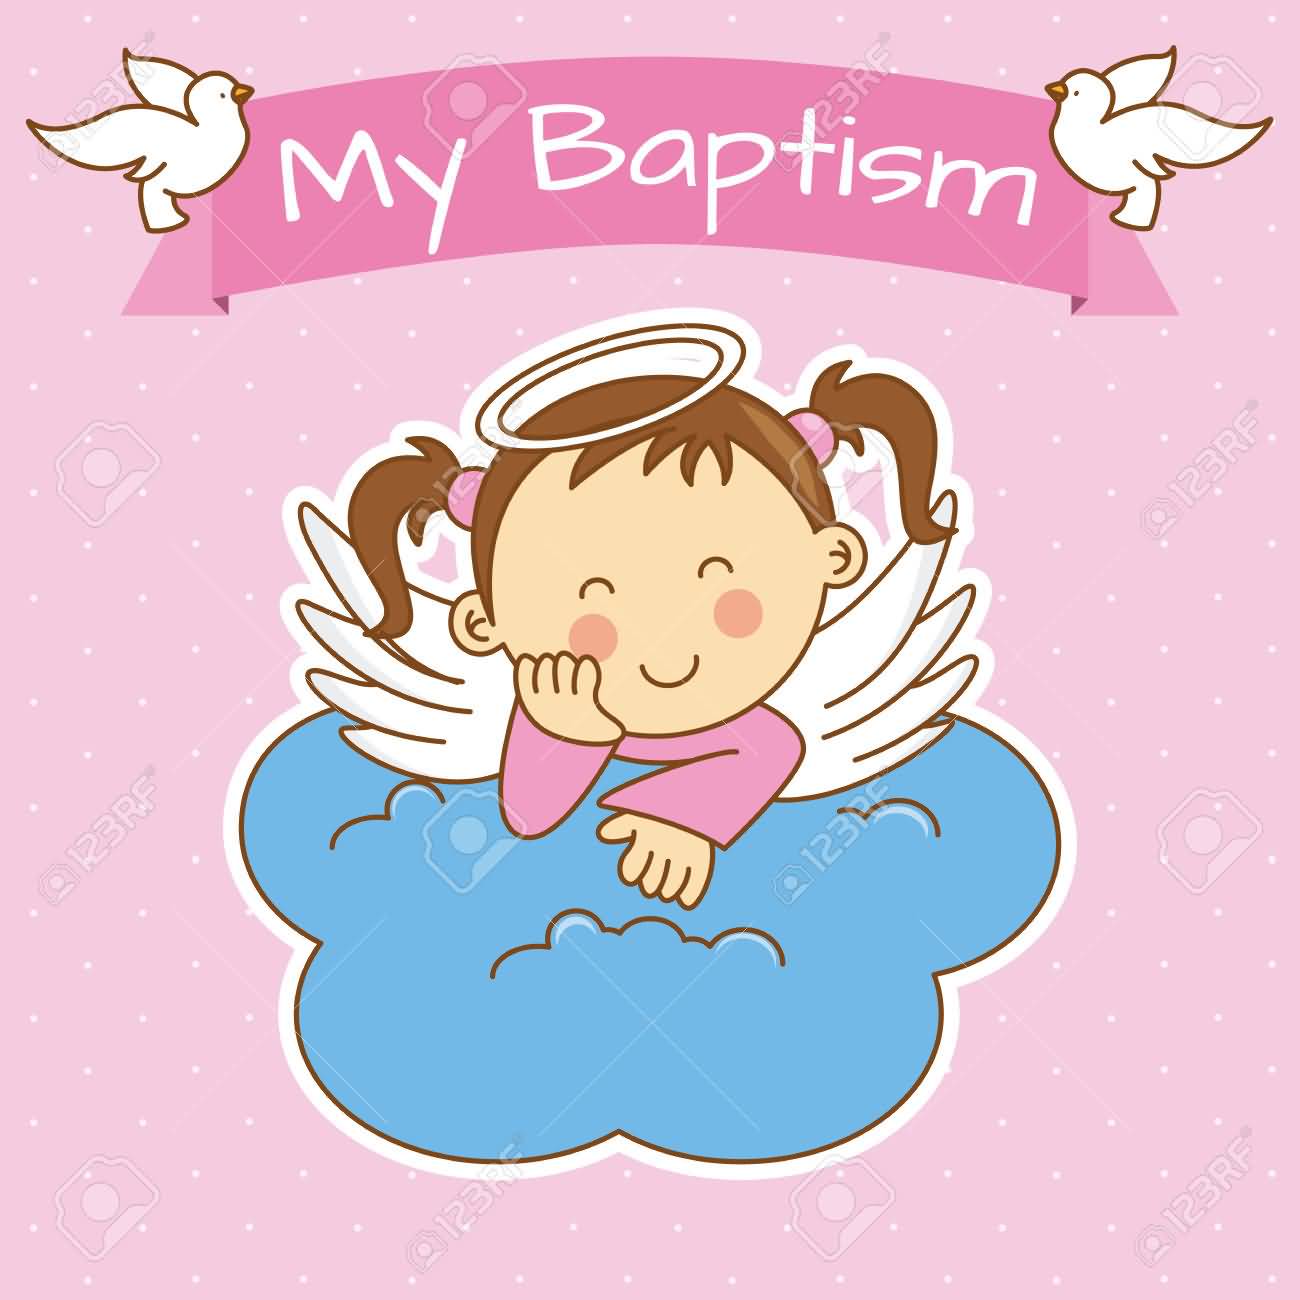 Best Baptism Wish Picture And Image